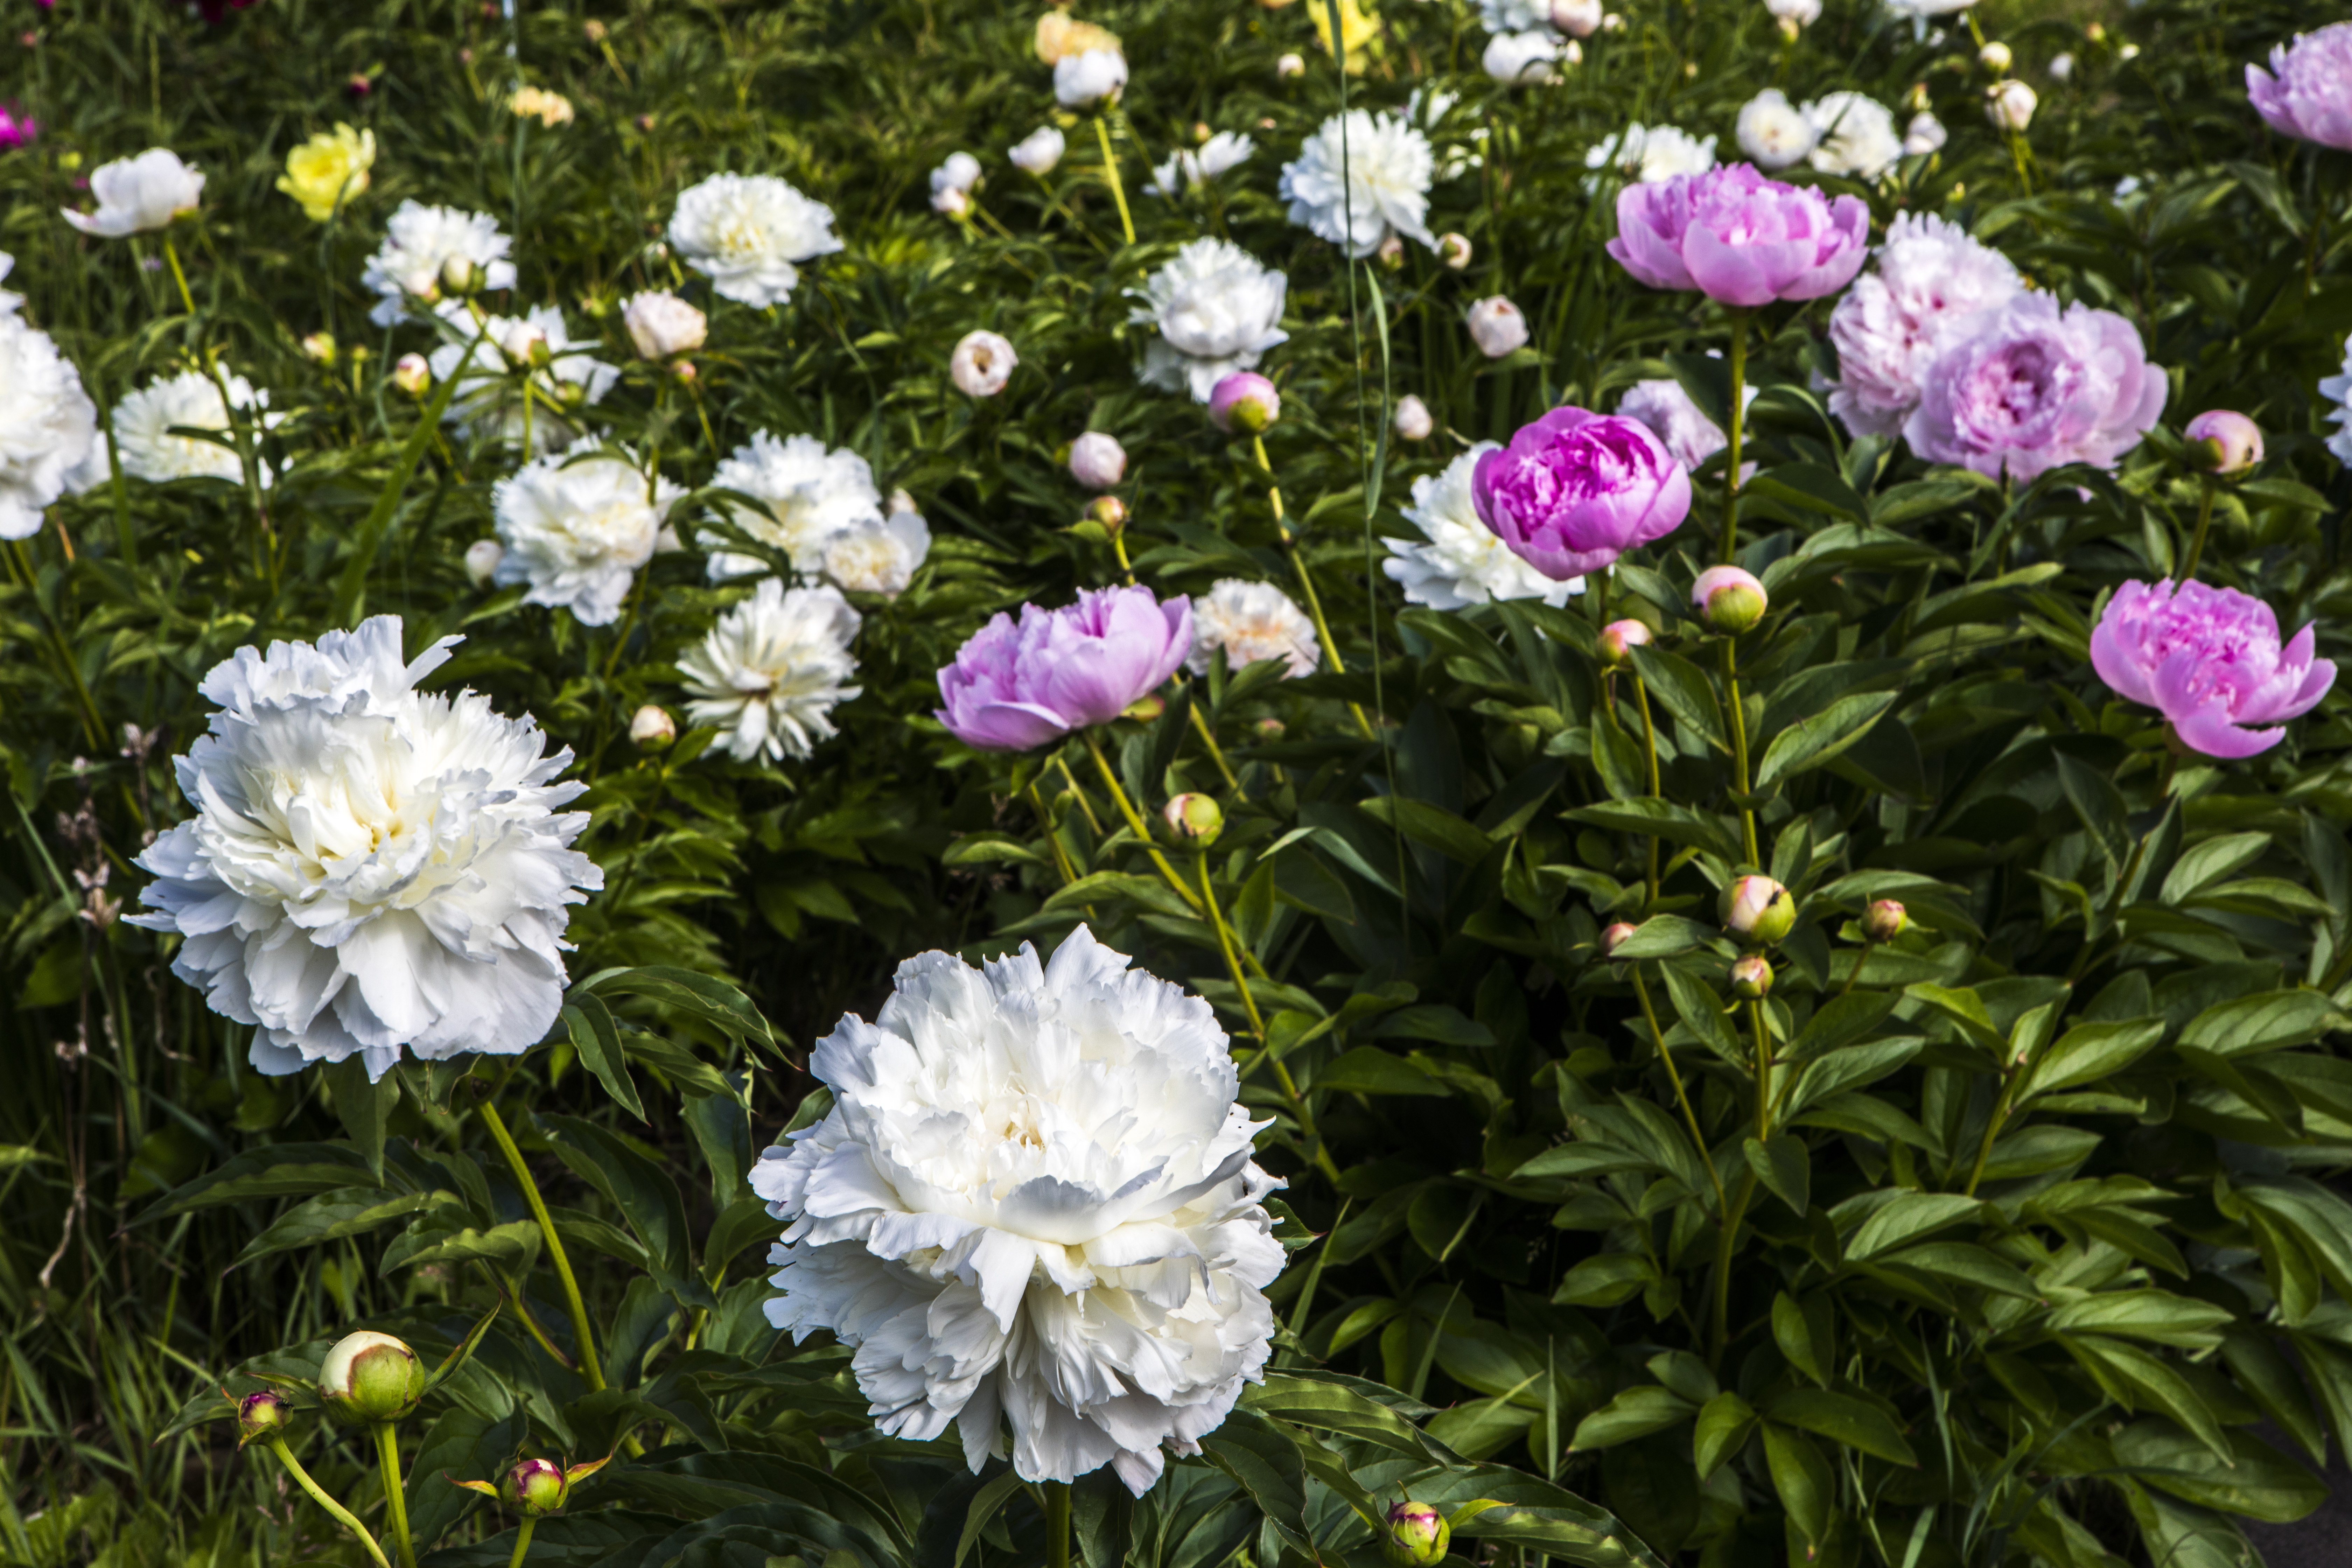 Peonies bloom at the UAF Georgeson Botanical Garden. UAF photo by JR Ancheta.